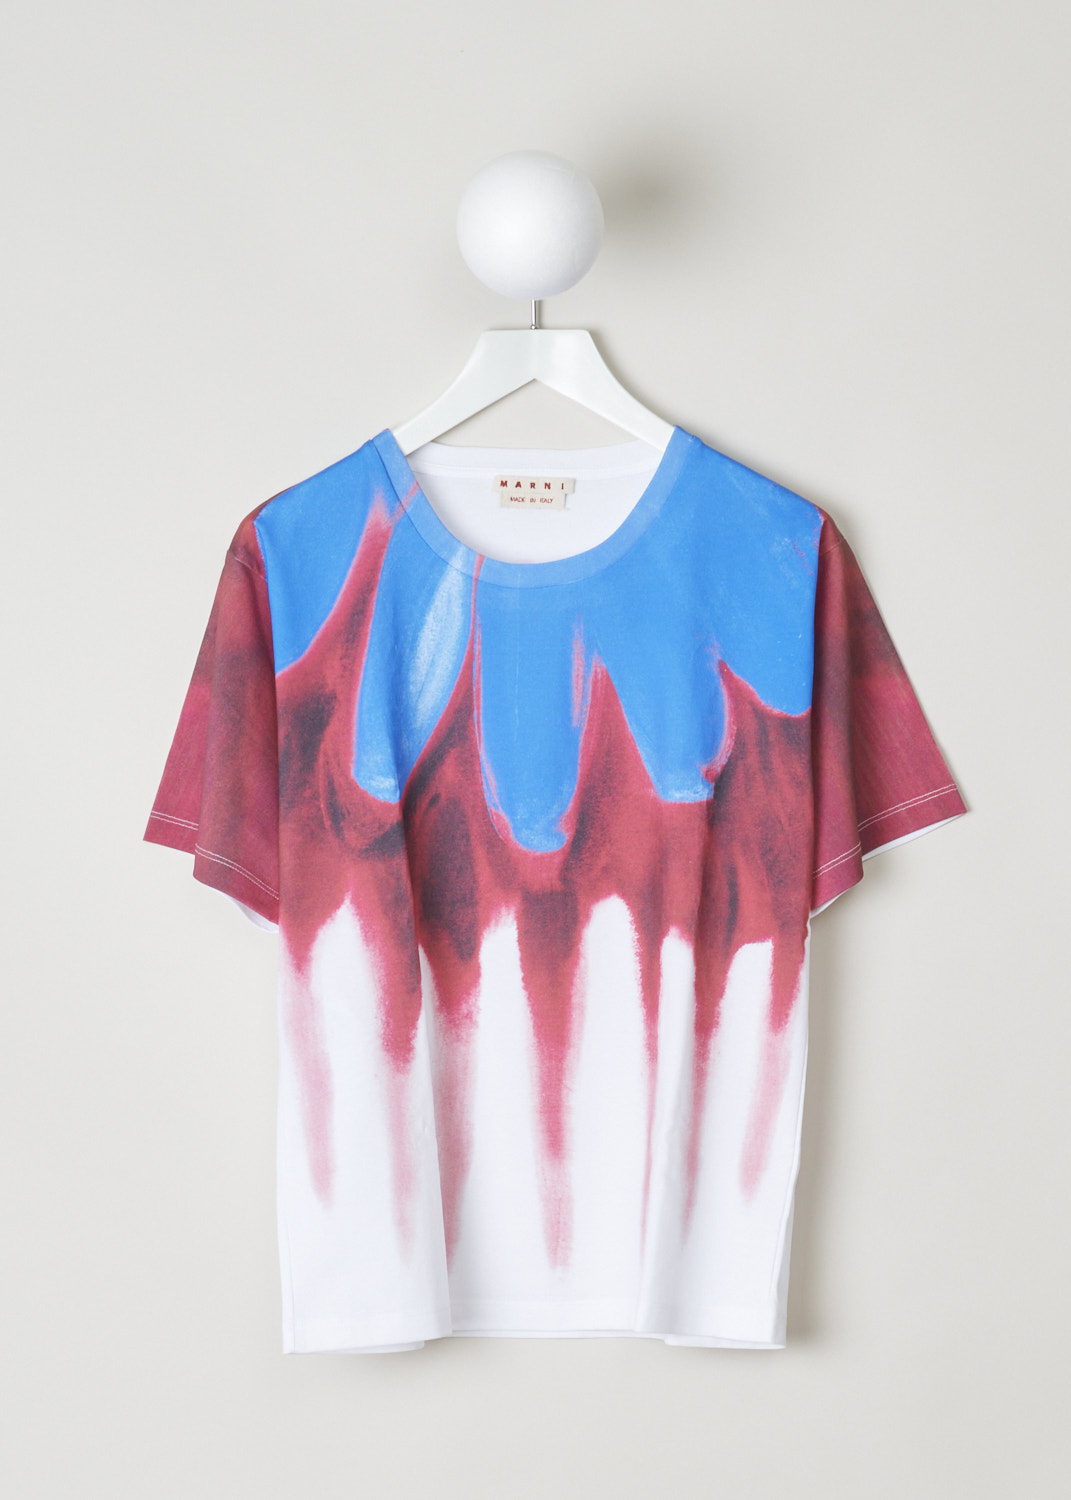 Marni, White printed t-shirt, THJEL32EPJ_USCT05_DDB56, print, red, white, blue, front, White t-shirt embellished with a lovely print in blue and red. 